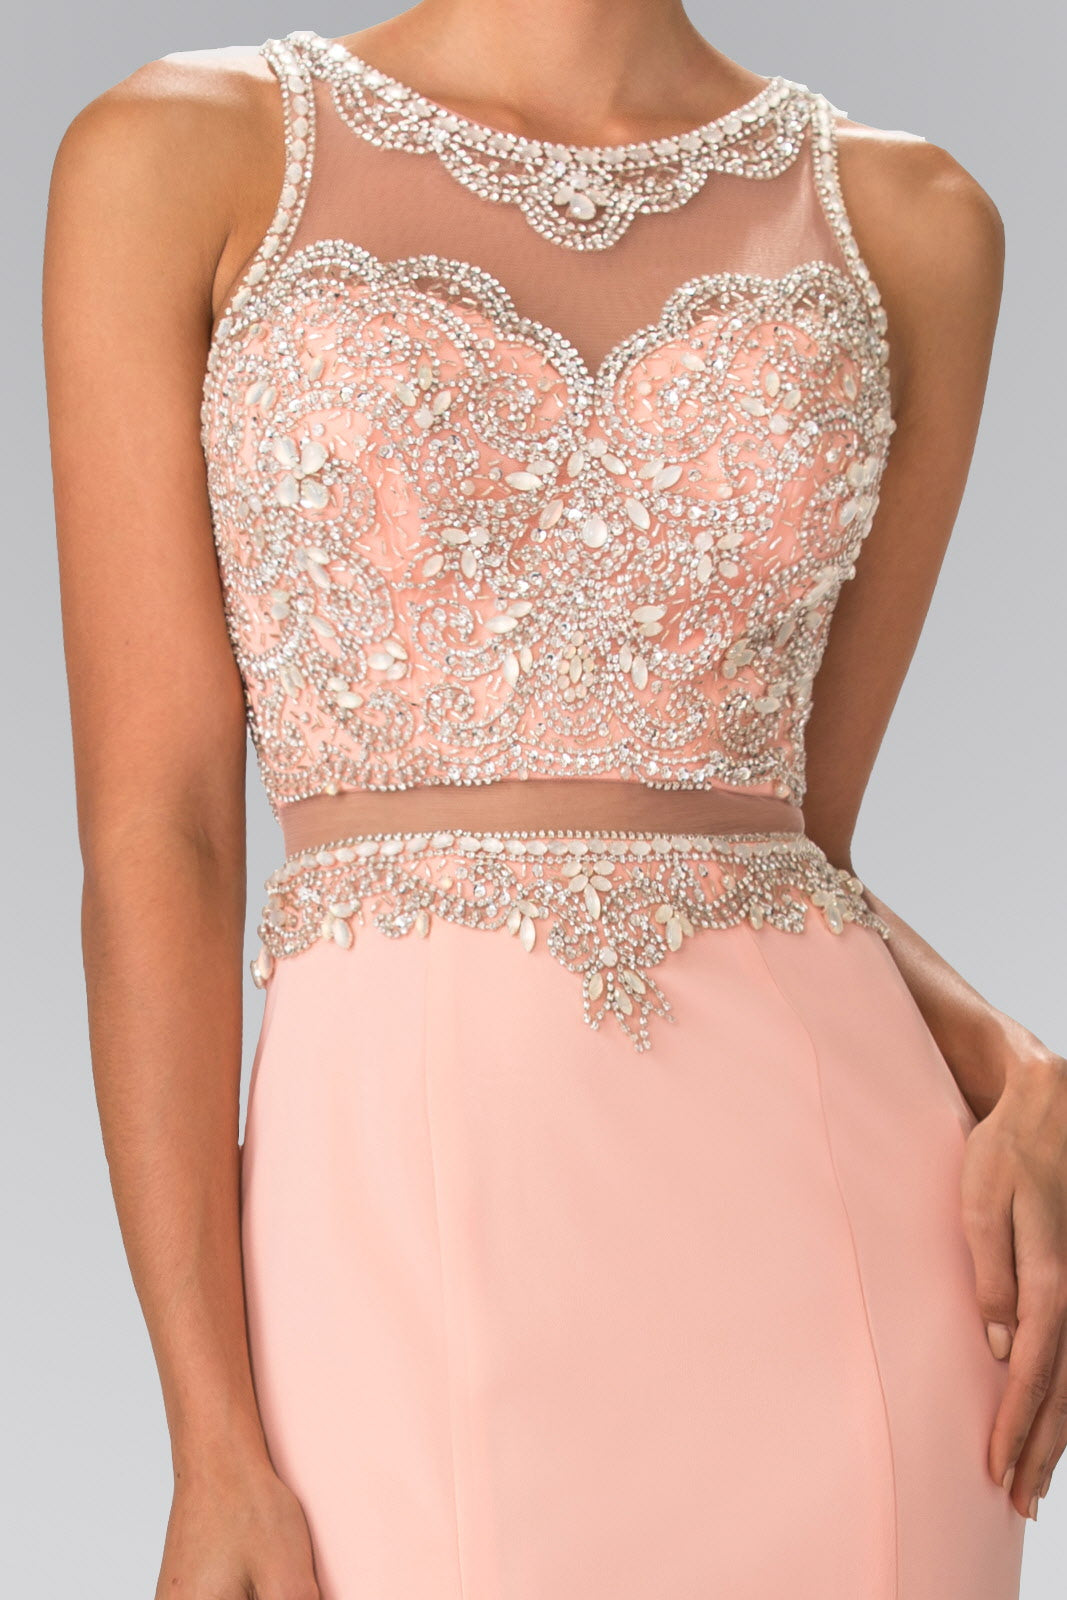 Prom Long Beaded Dress Formal Evening Gown - The Dress Outlet Peach